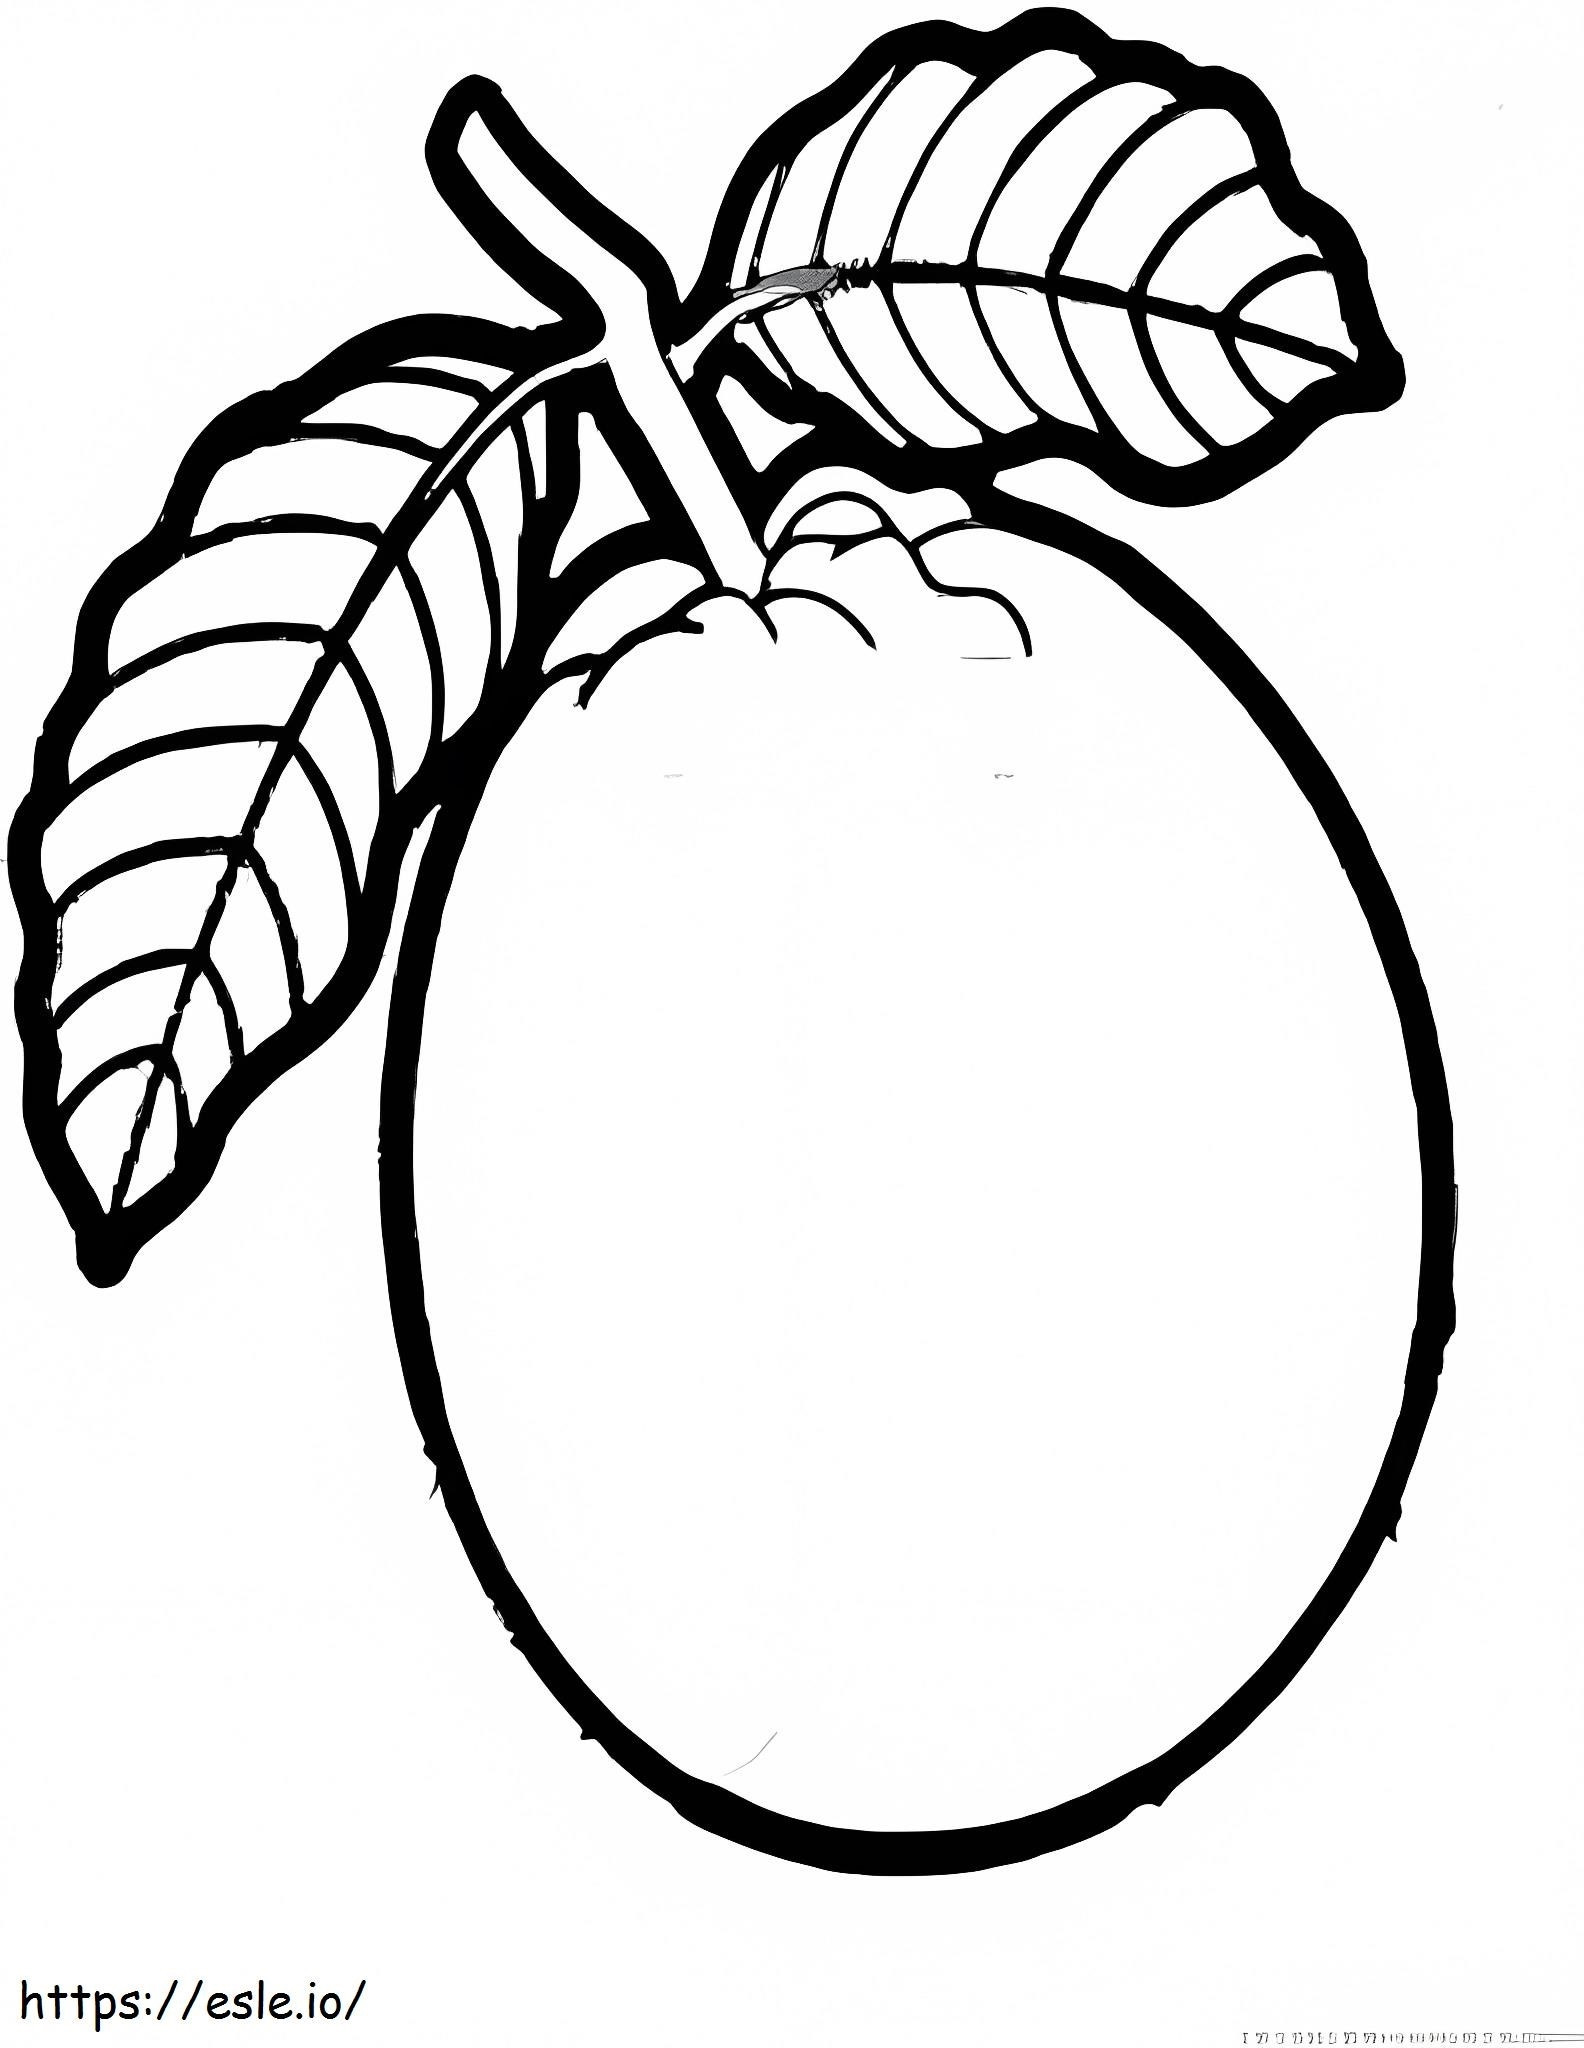 Awesome Guava coloring page